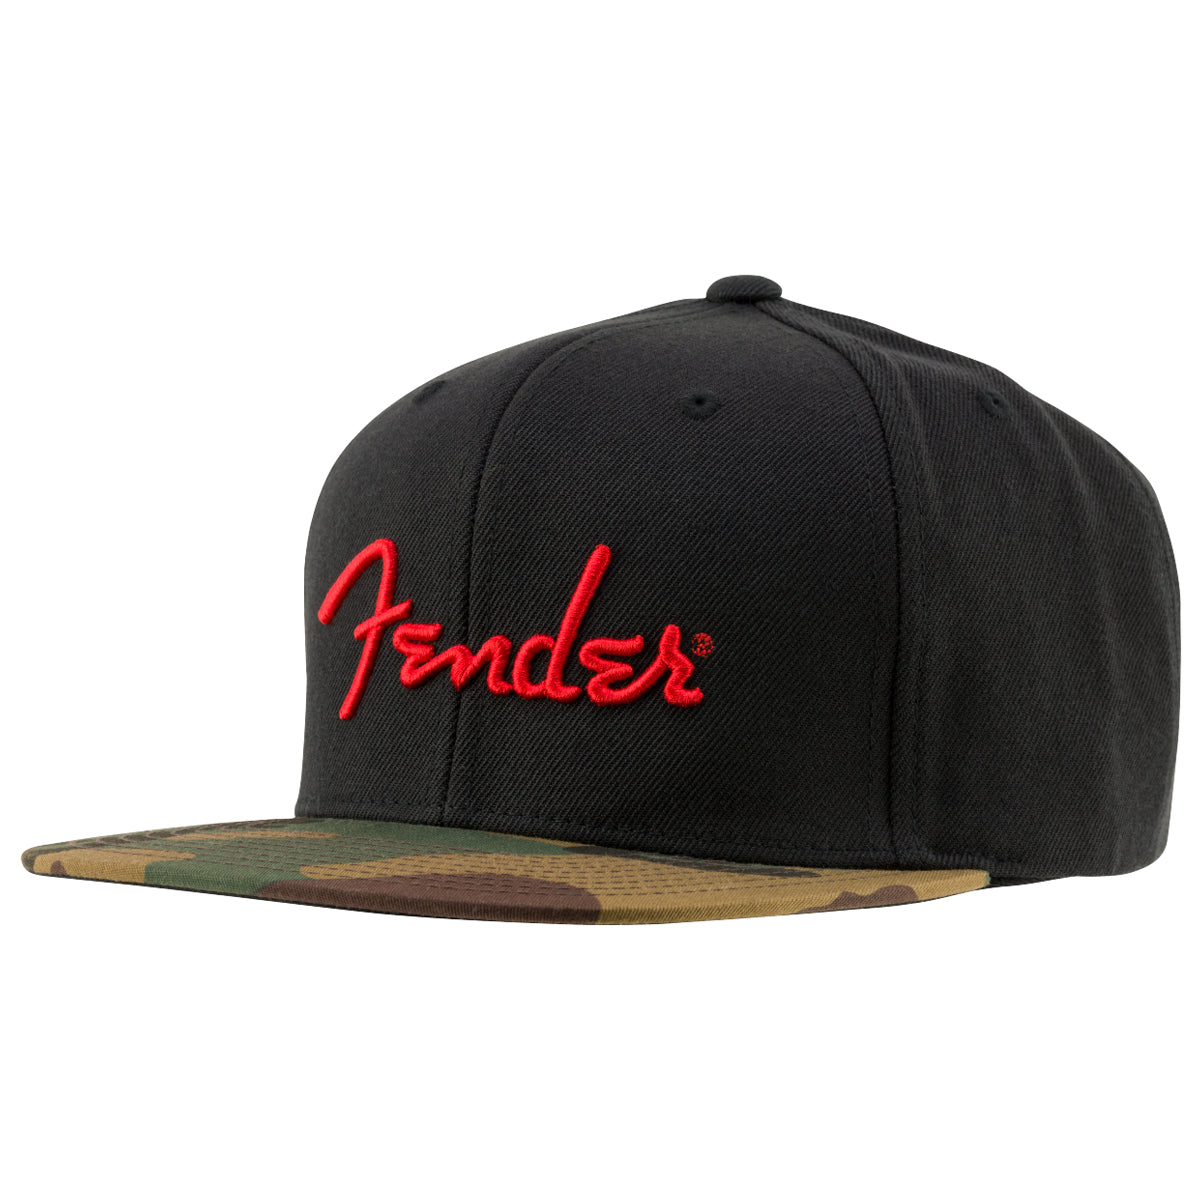 Fender Camo Flatbill Hat - One Size Fits Most - 9190119000